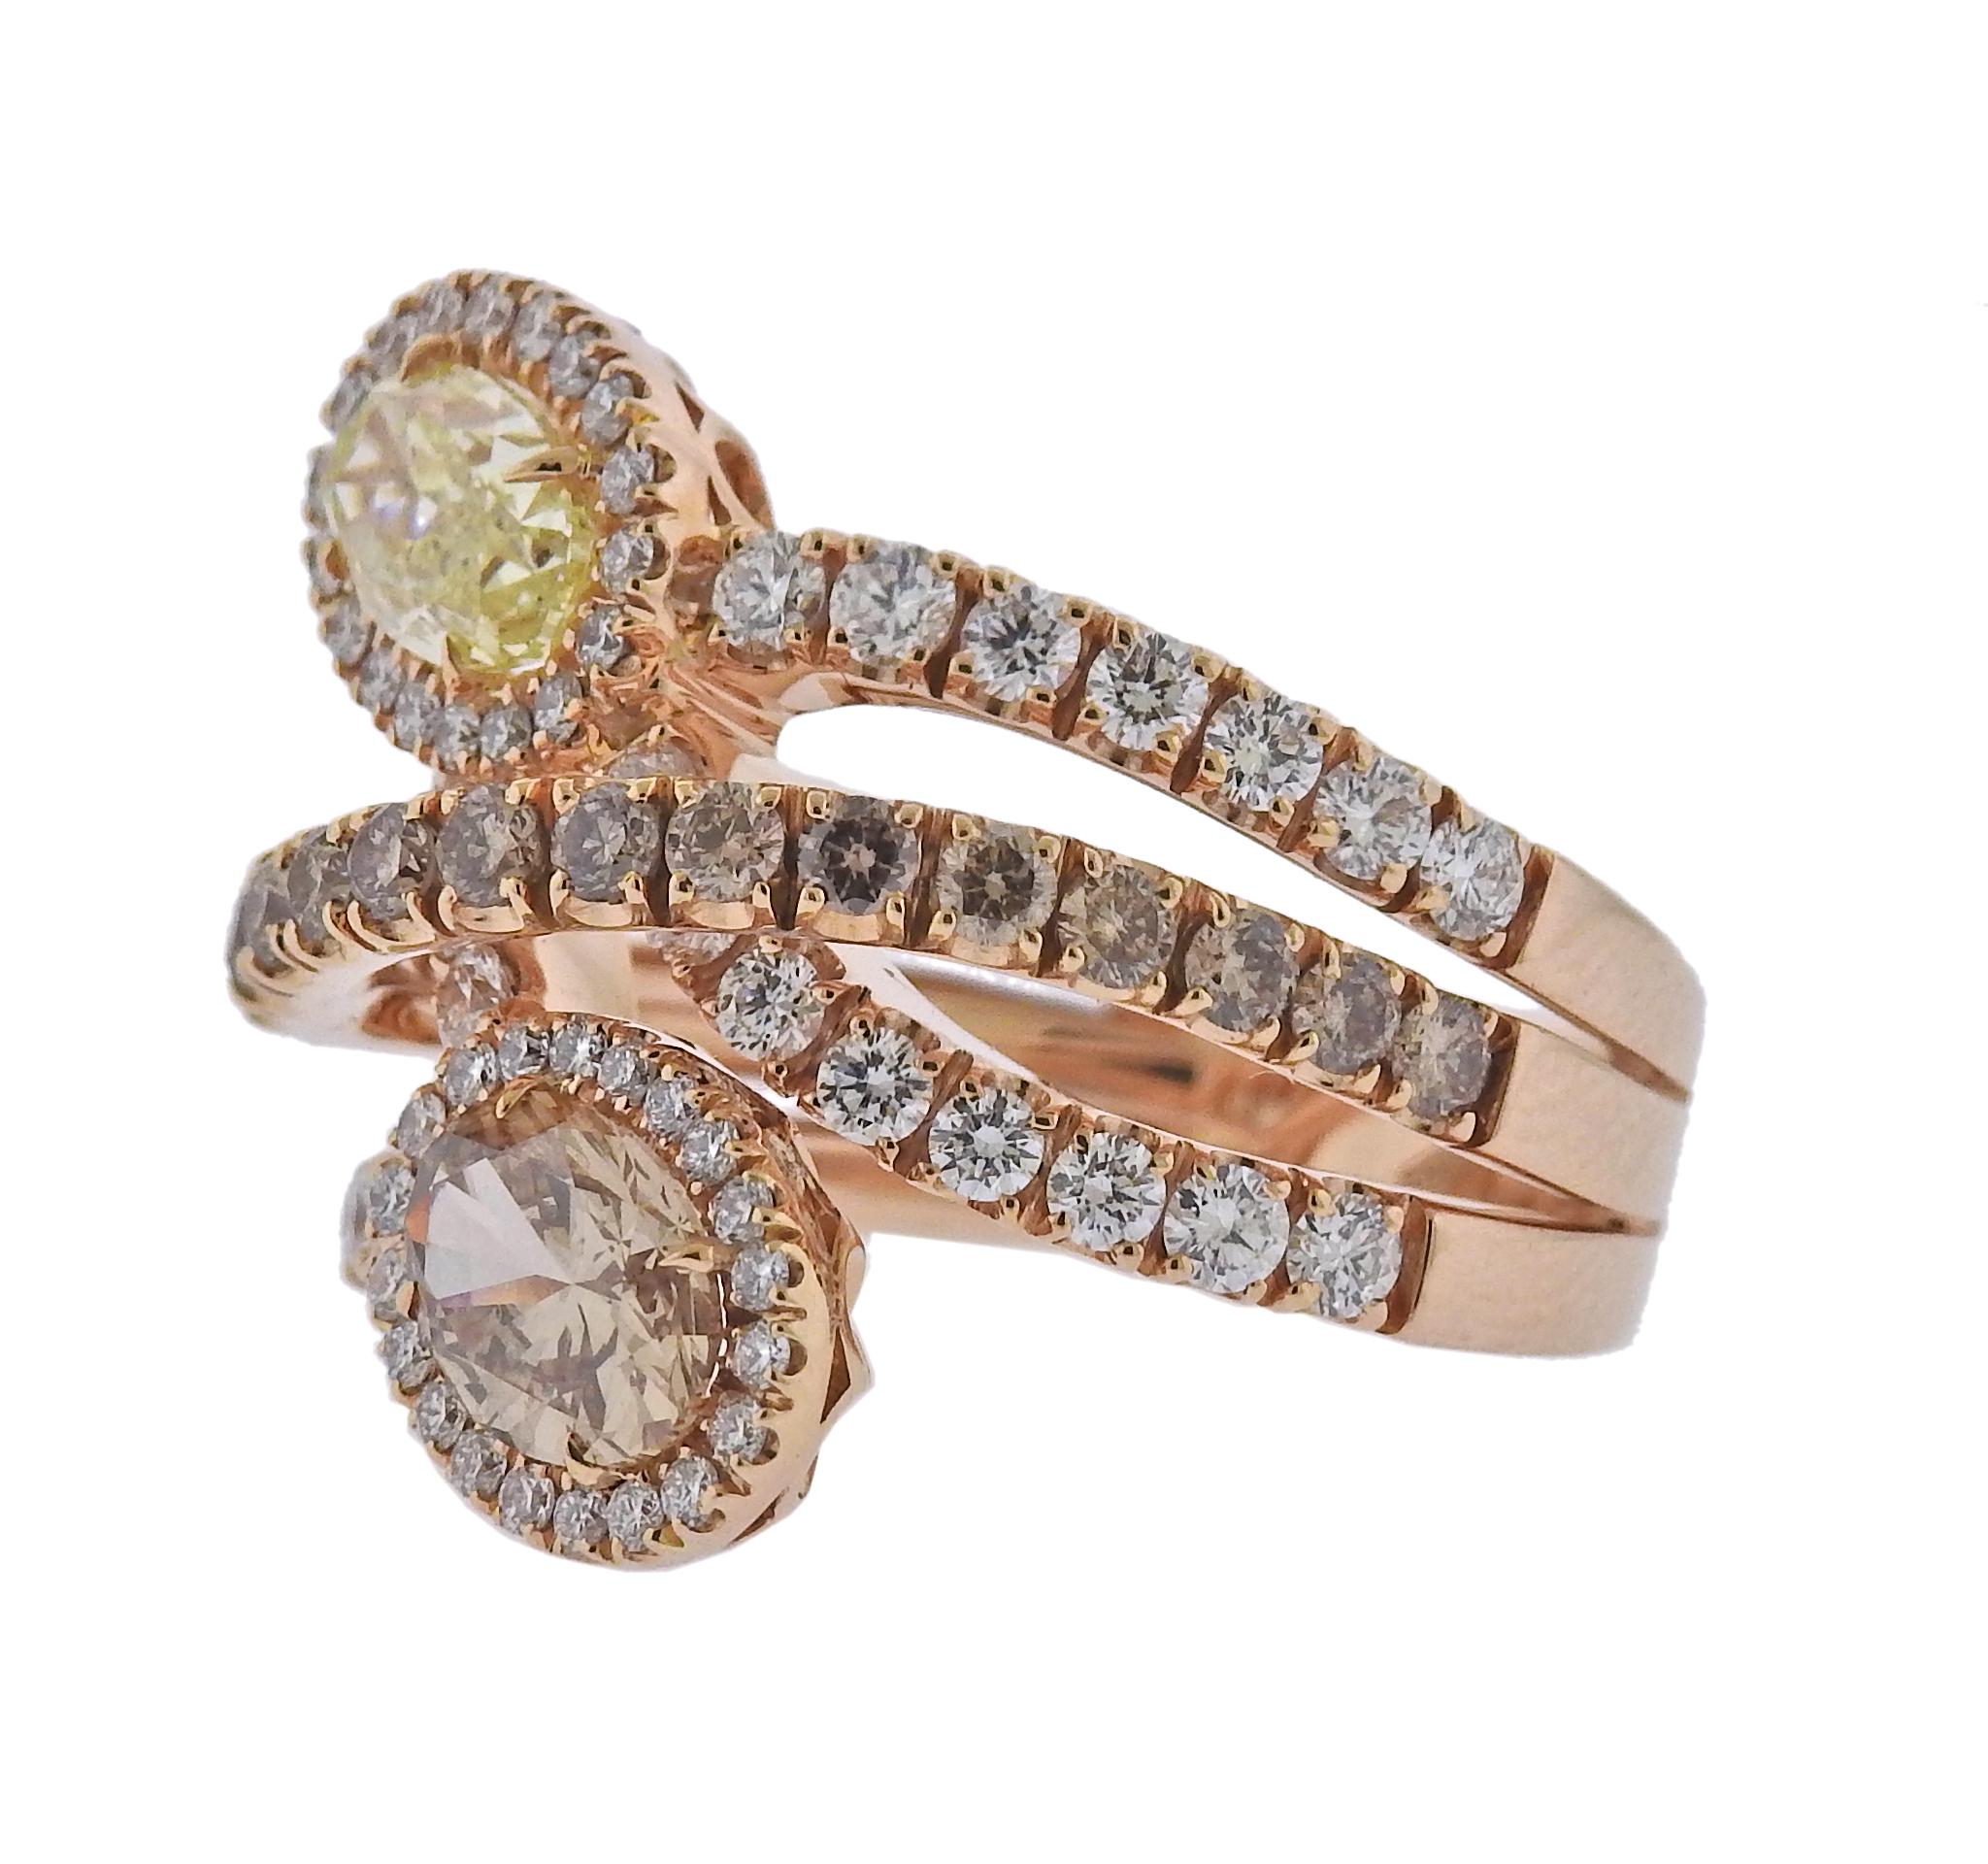 Brand new with tag Bucherer ring, in 18k gold, with 1.02ct yellow, 1.02ct brown and 1.33ctw surrounding SI and fancy diamonds. Comes with box. Ring size - 7, ring top is 25mm wide.  Weight - 13.6 grams. Marked: CB 750.